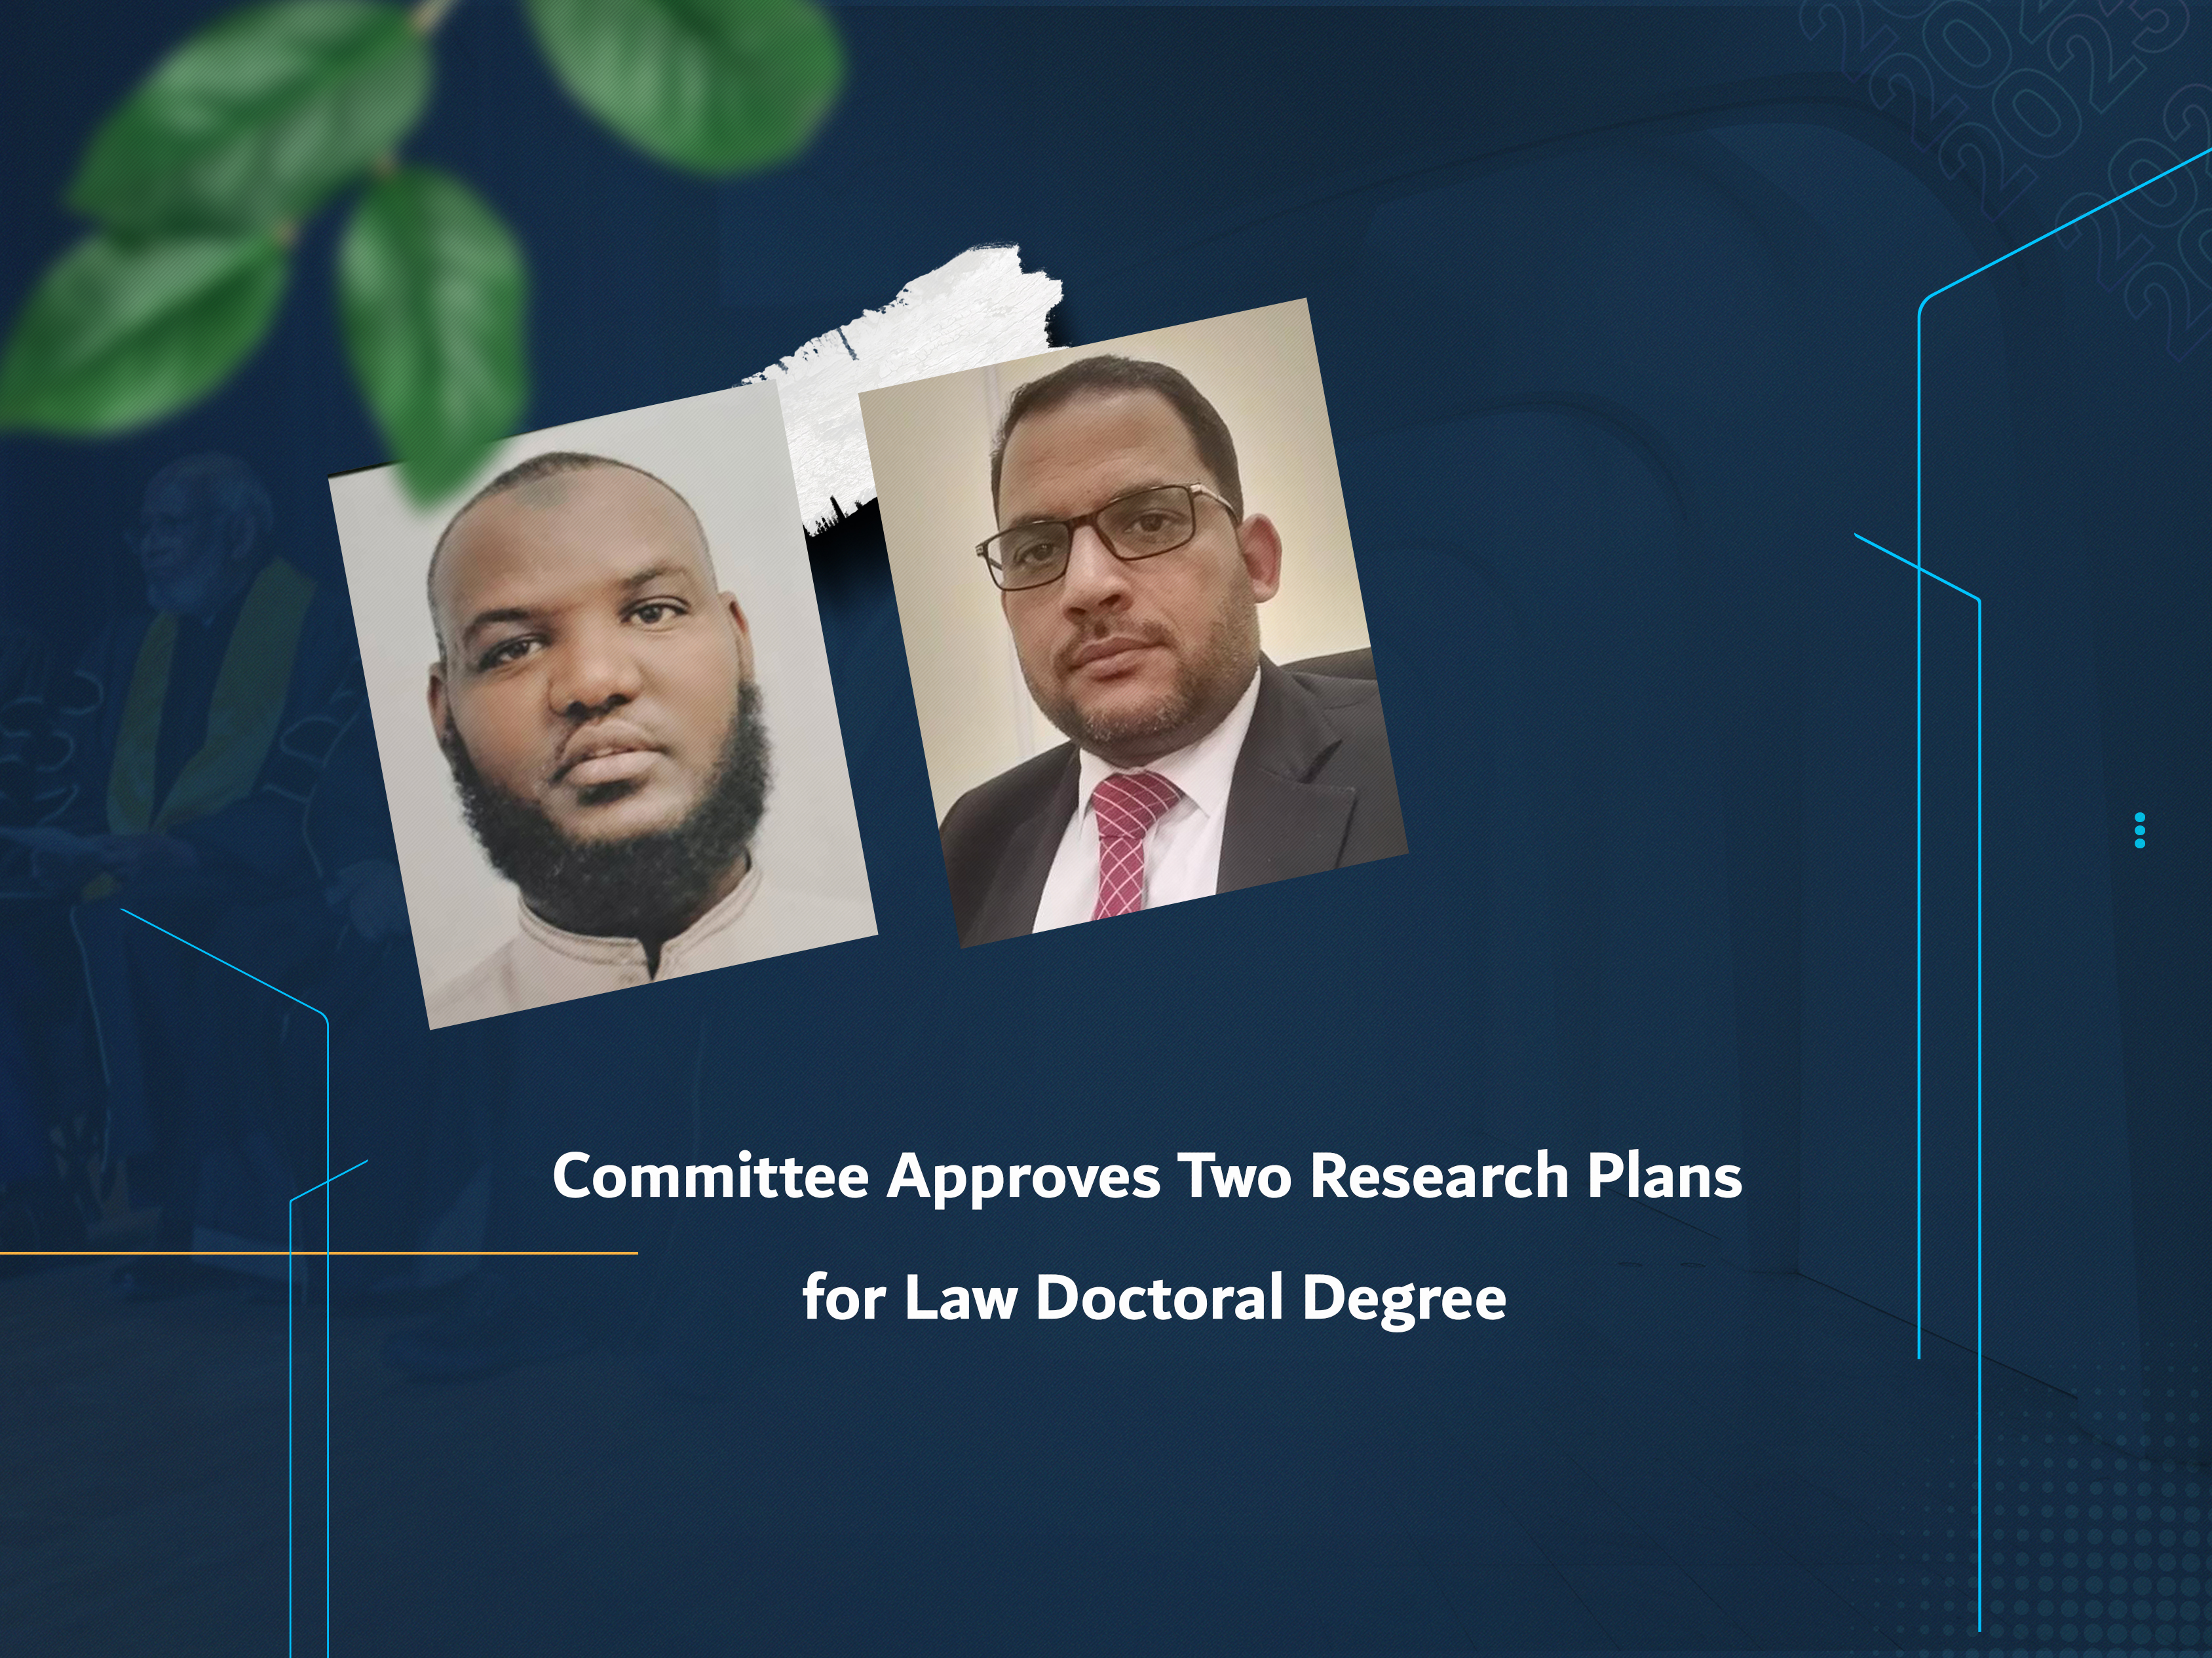 Committee Approves Two Research Plans for Law Doctoral Degree